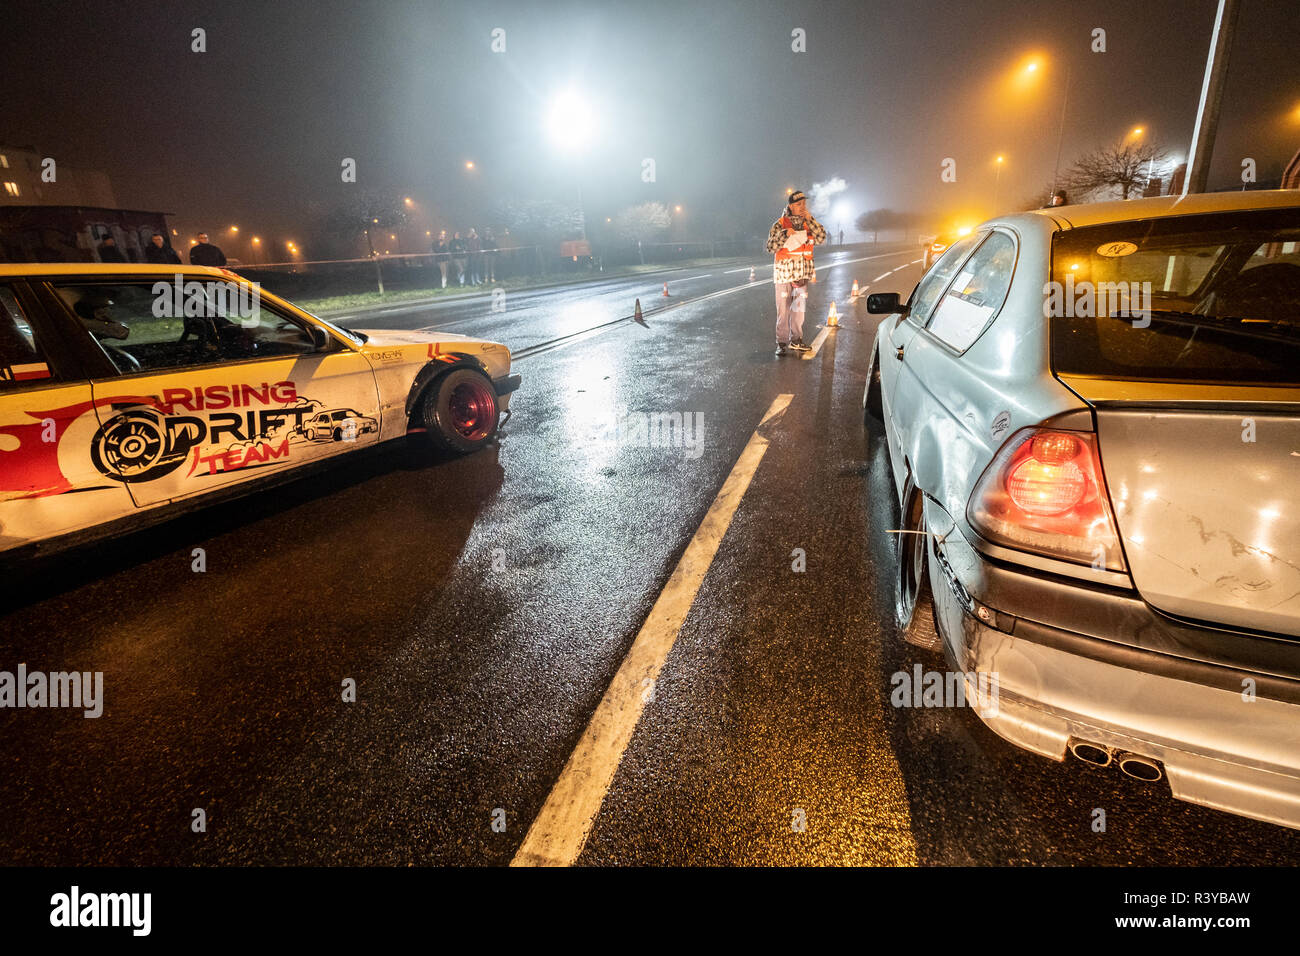 Zgierz, Poland. 24th November, 2018. Over 50 drivers and their drift cars, some of then having 500-700 hp engines are meeting is Zgierz in central Poland for season closing. It is dark and wet. Robert Pastryk / Alamy Live News Stock Photo